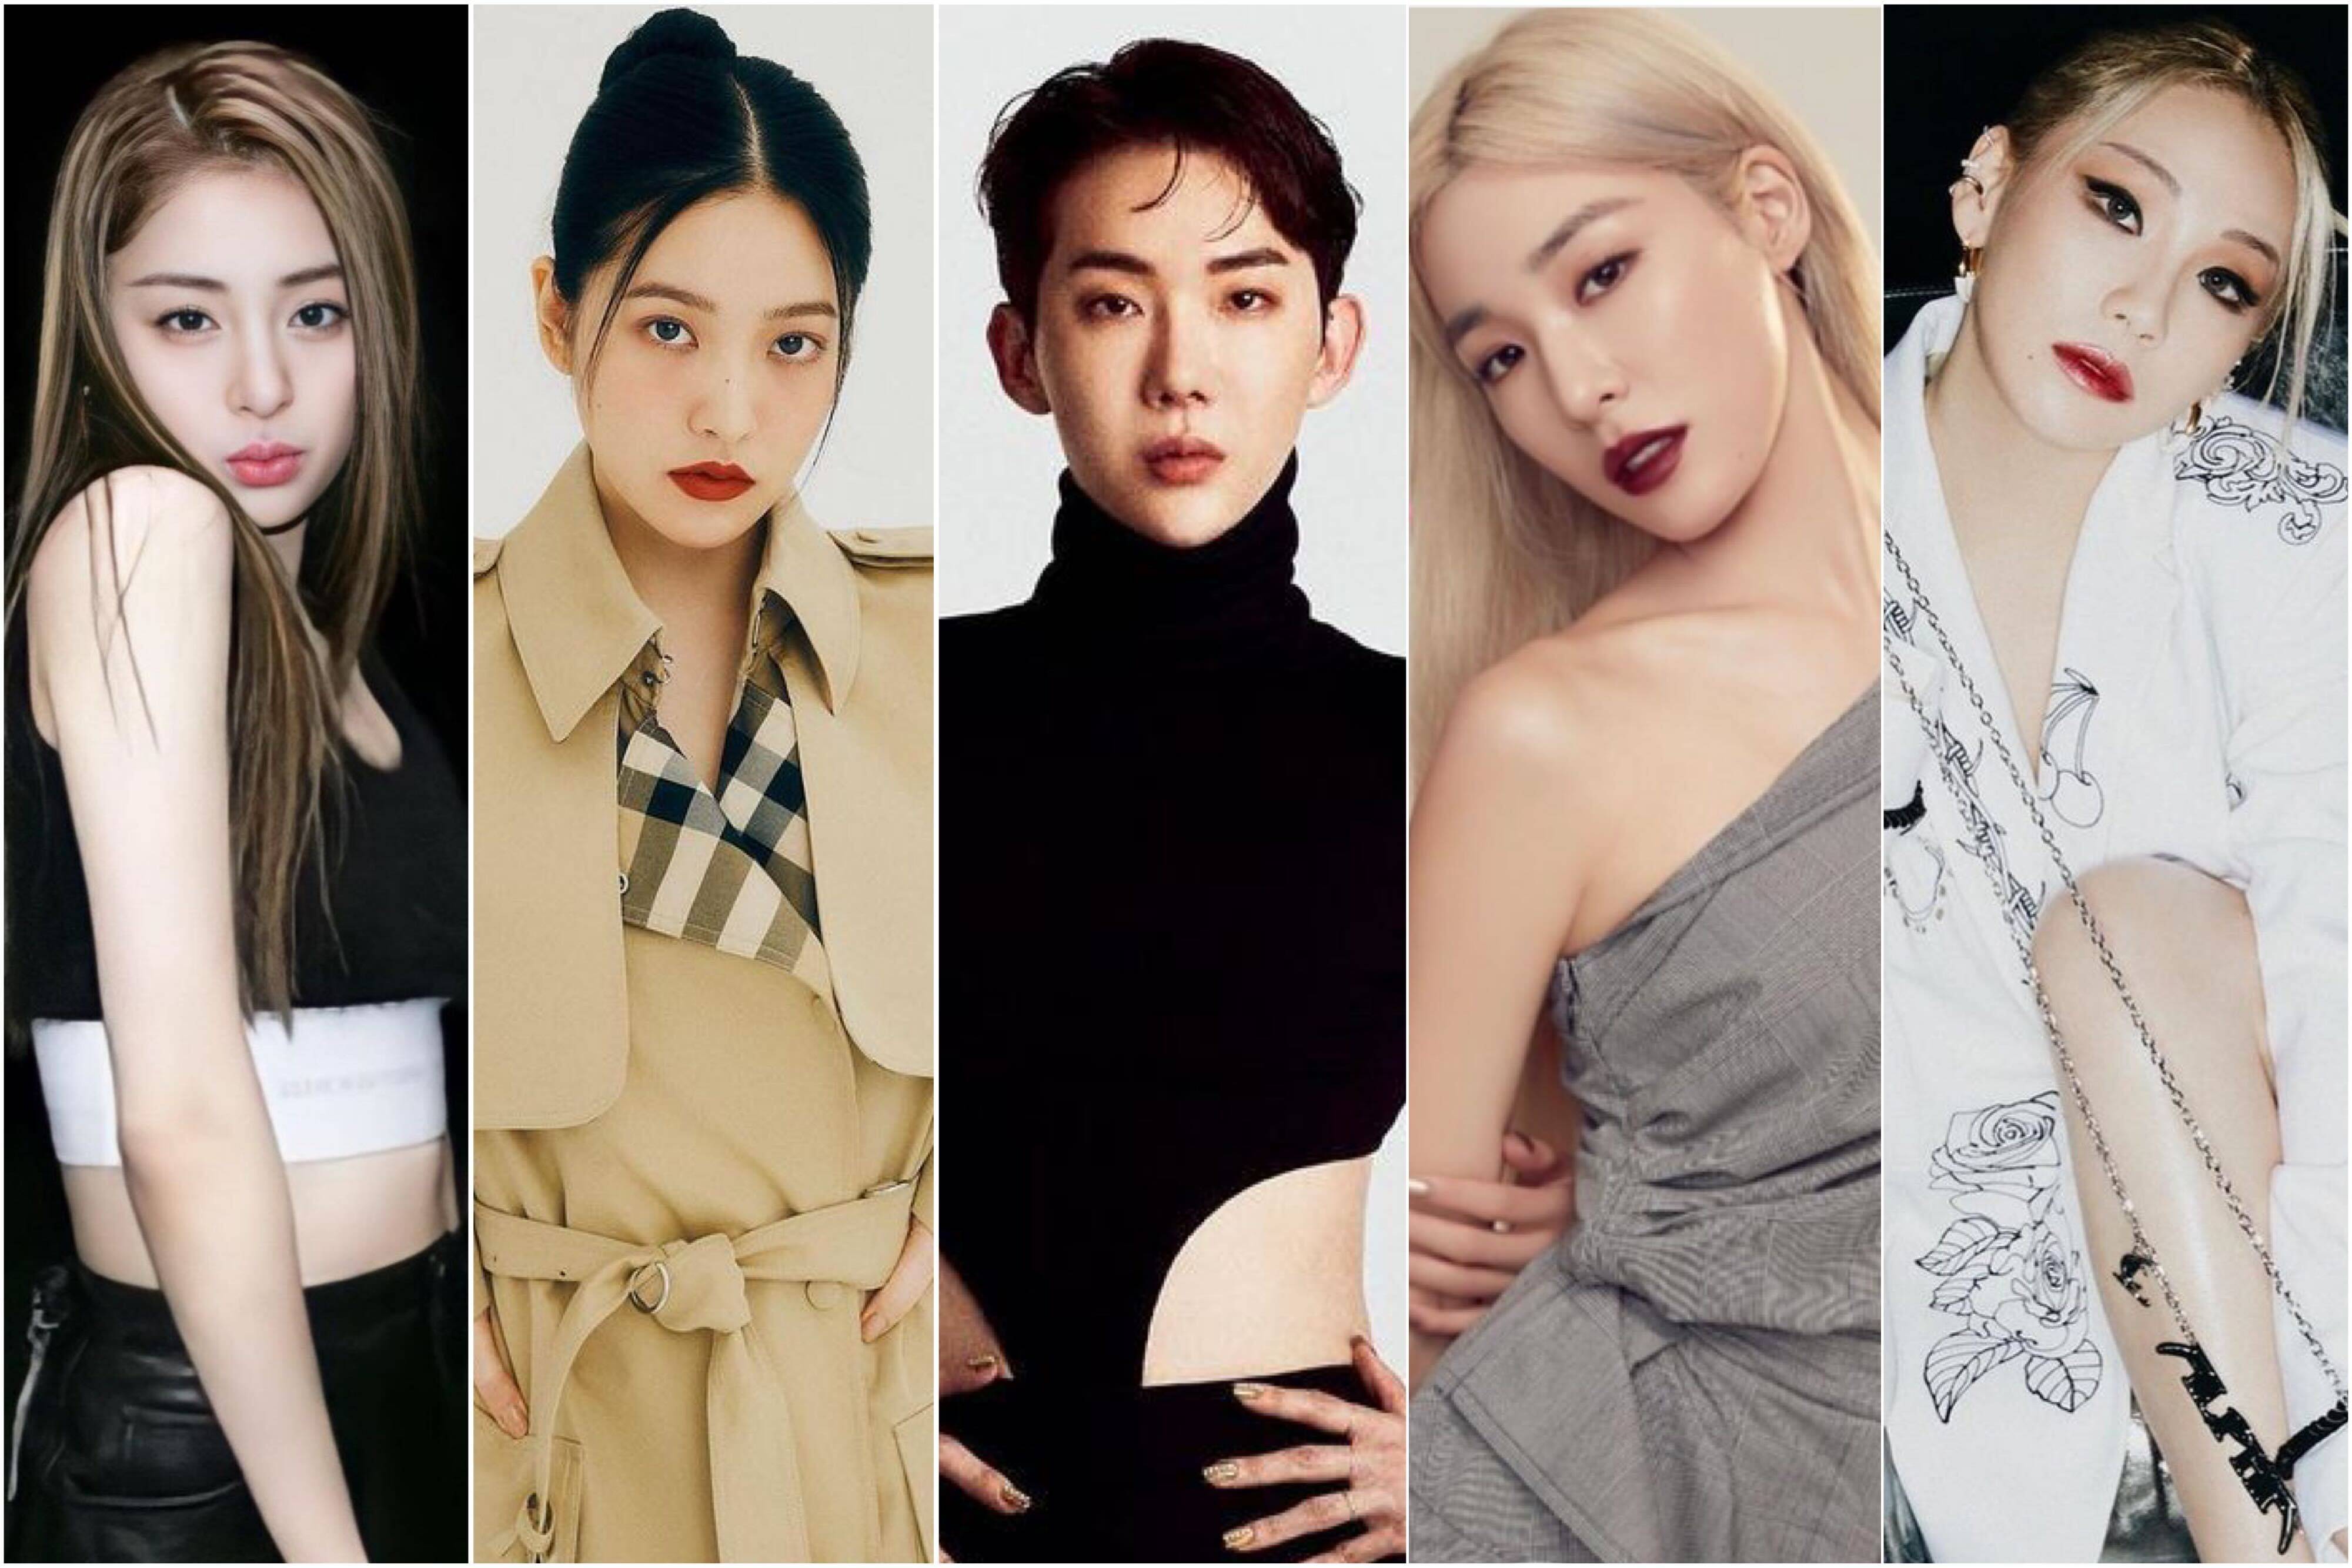 7 K-pop stars openly supporting the LGBT community, from Red